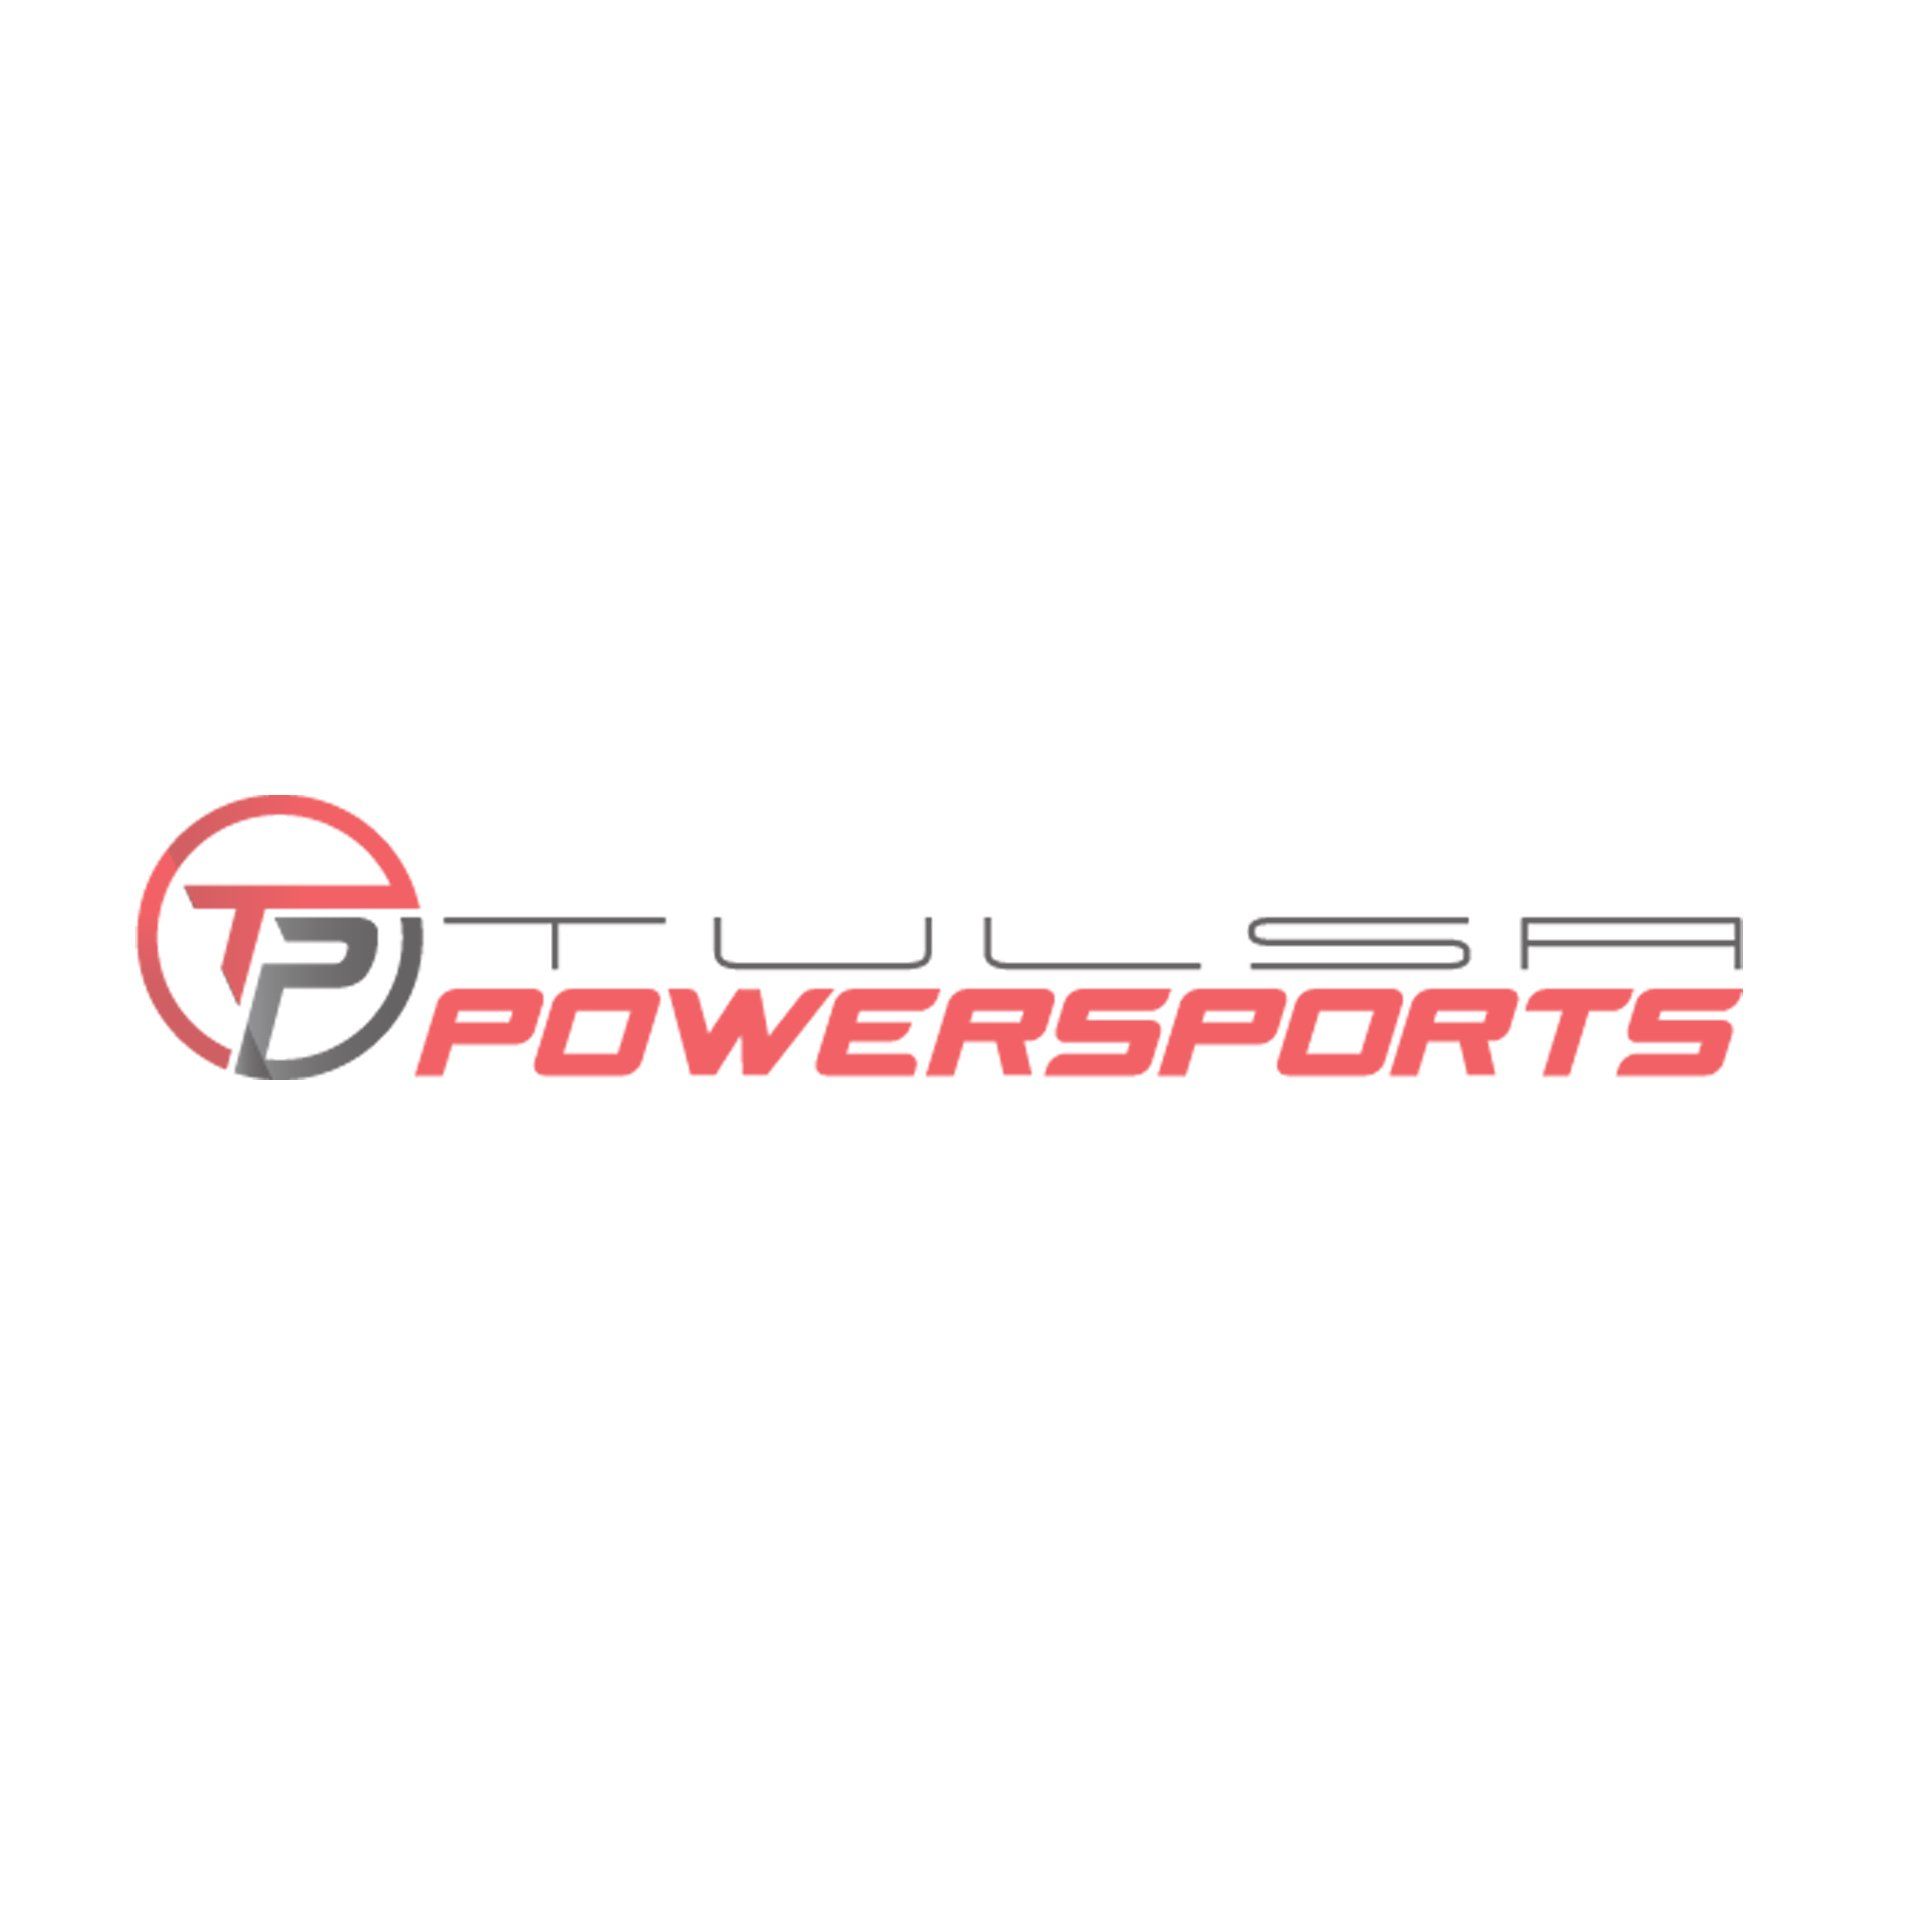 A logo for tulsa powersports is shown on a white background.